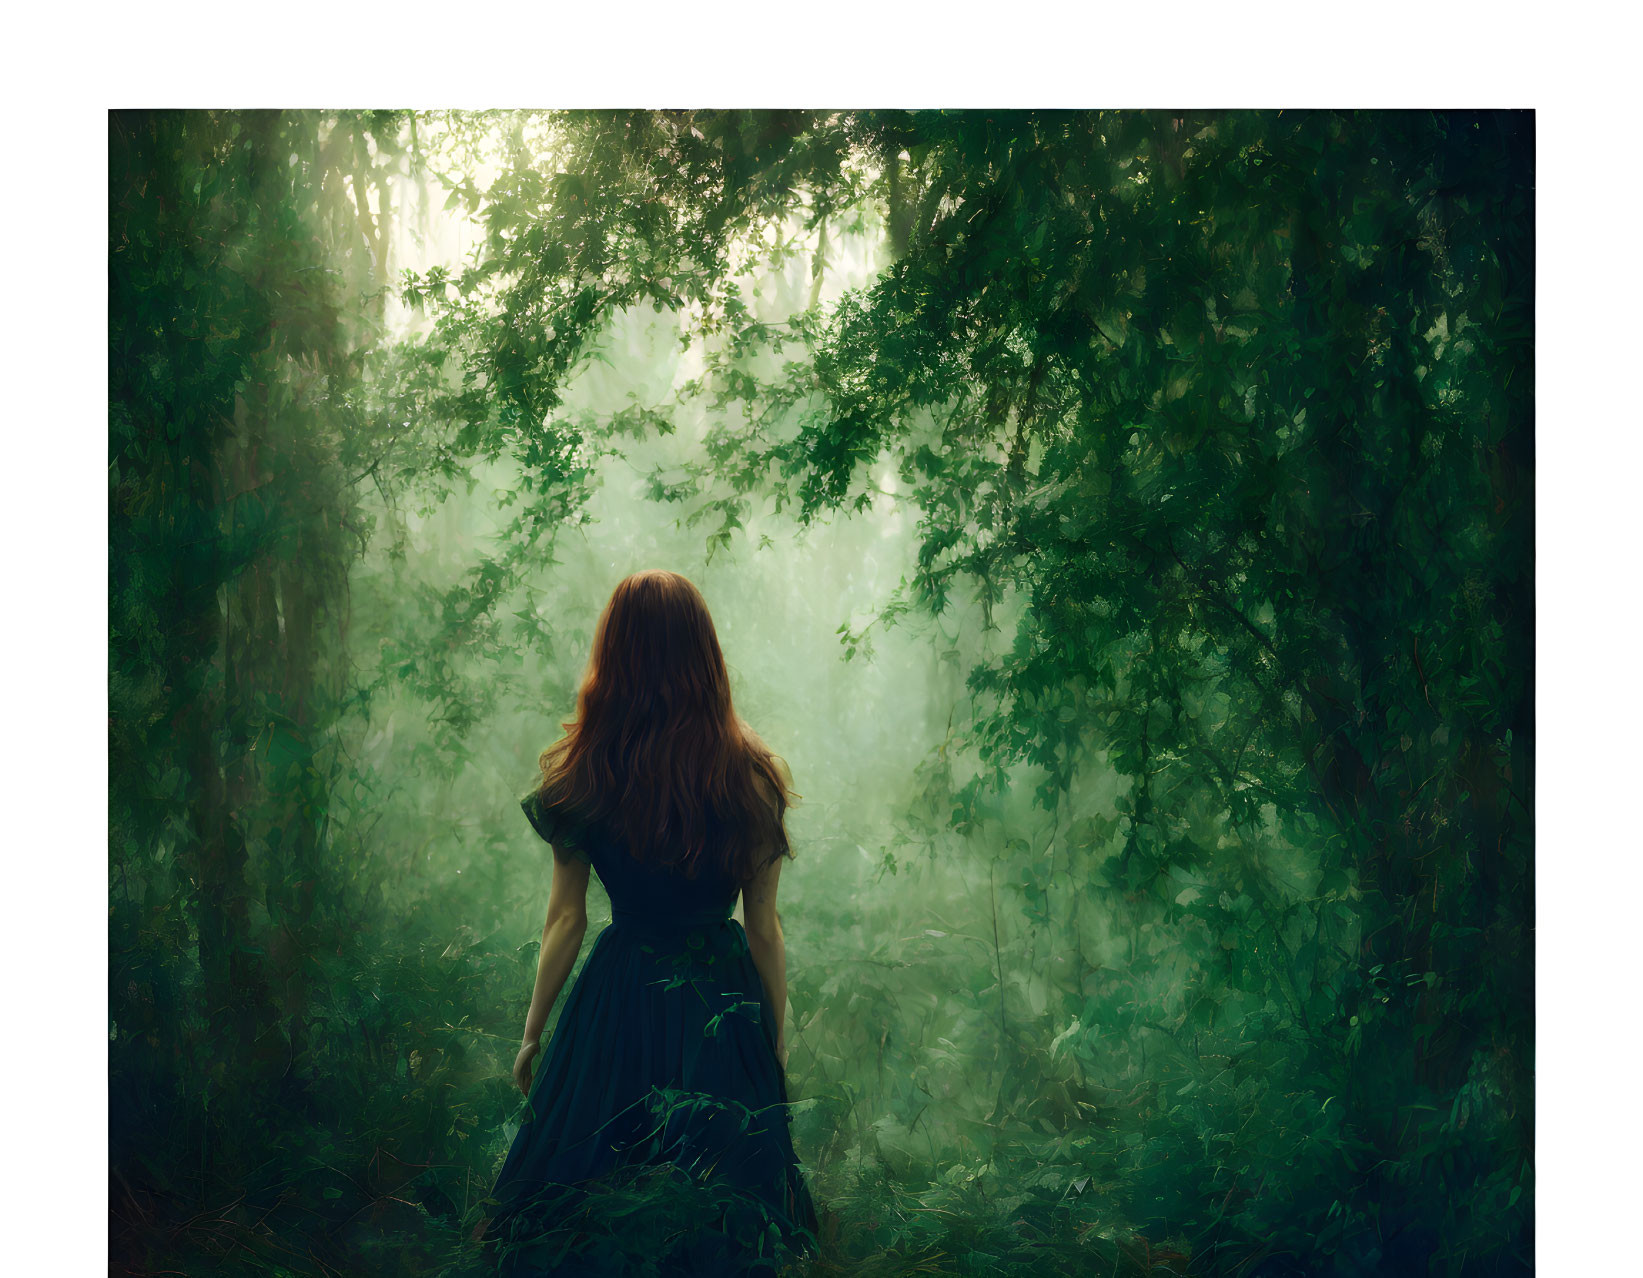 Long-haired woman gazing into mystical sunlit forest